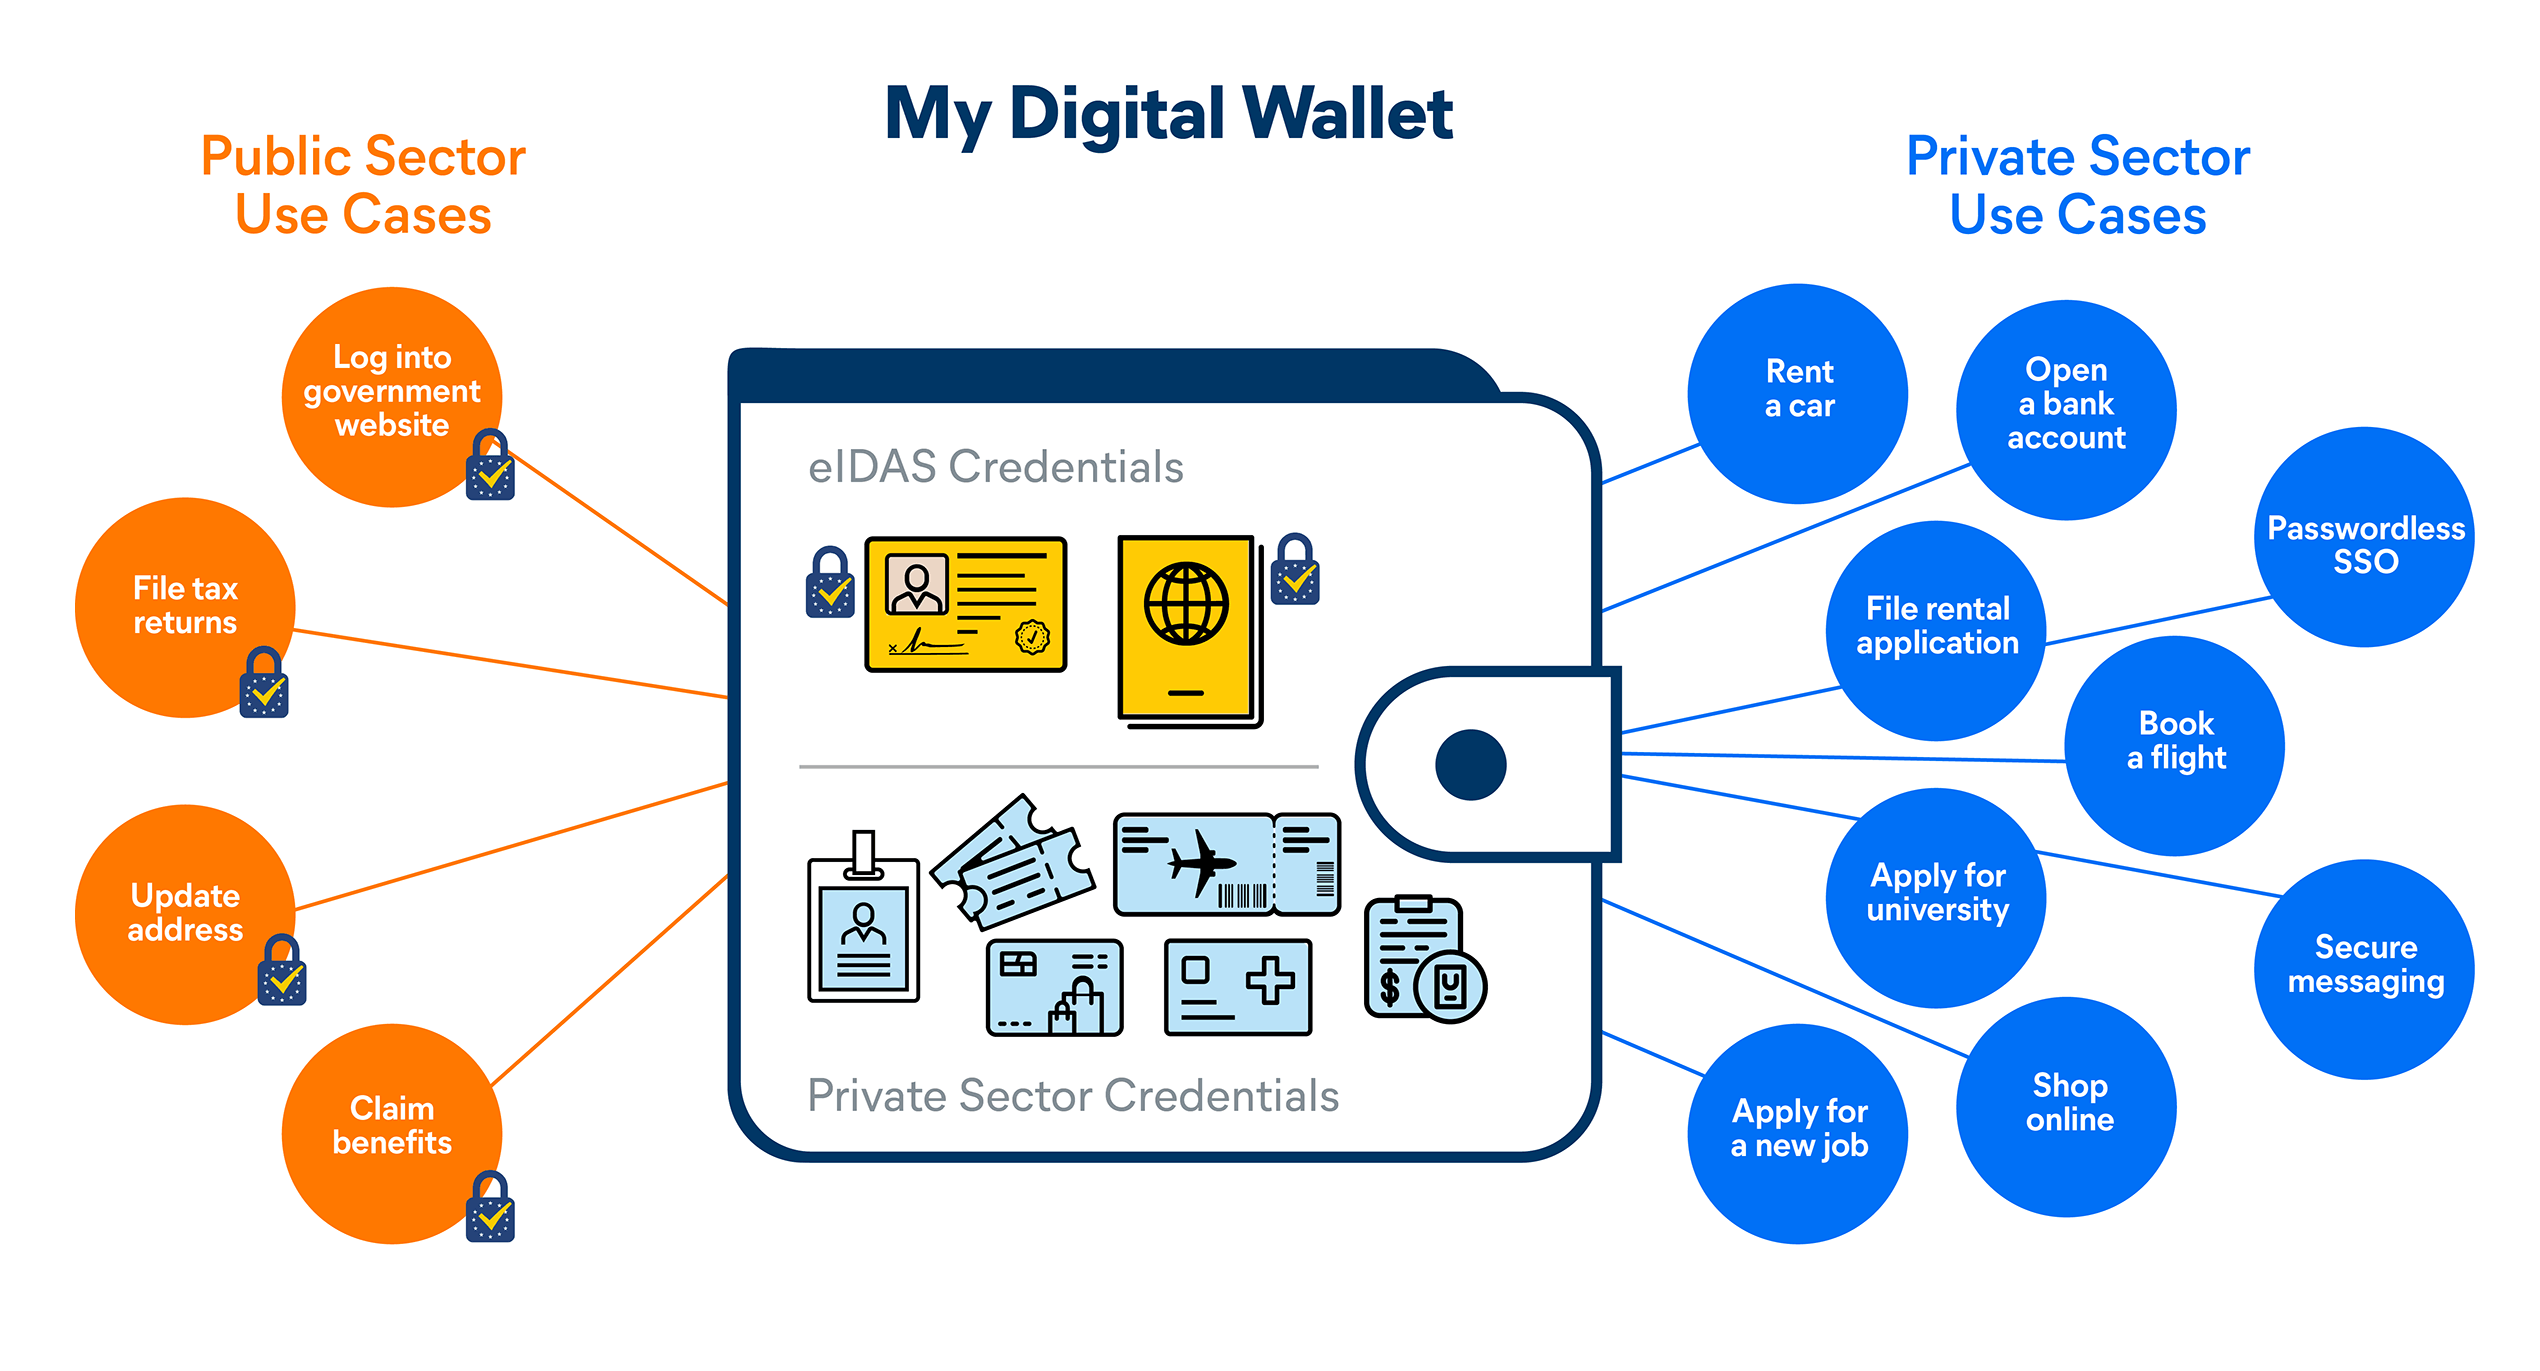 Combining eIDAS and private sector credentials in a digital wallet